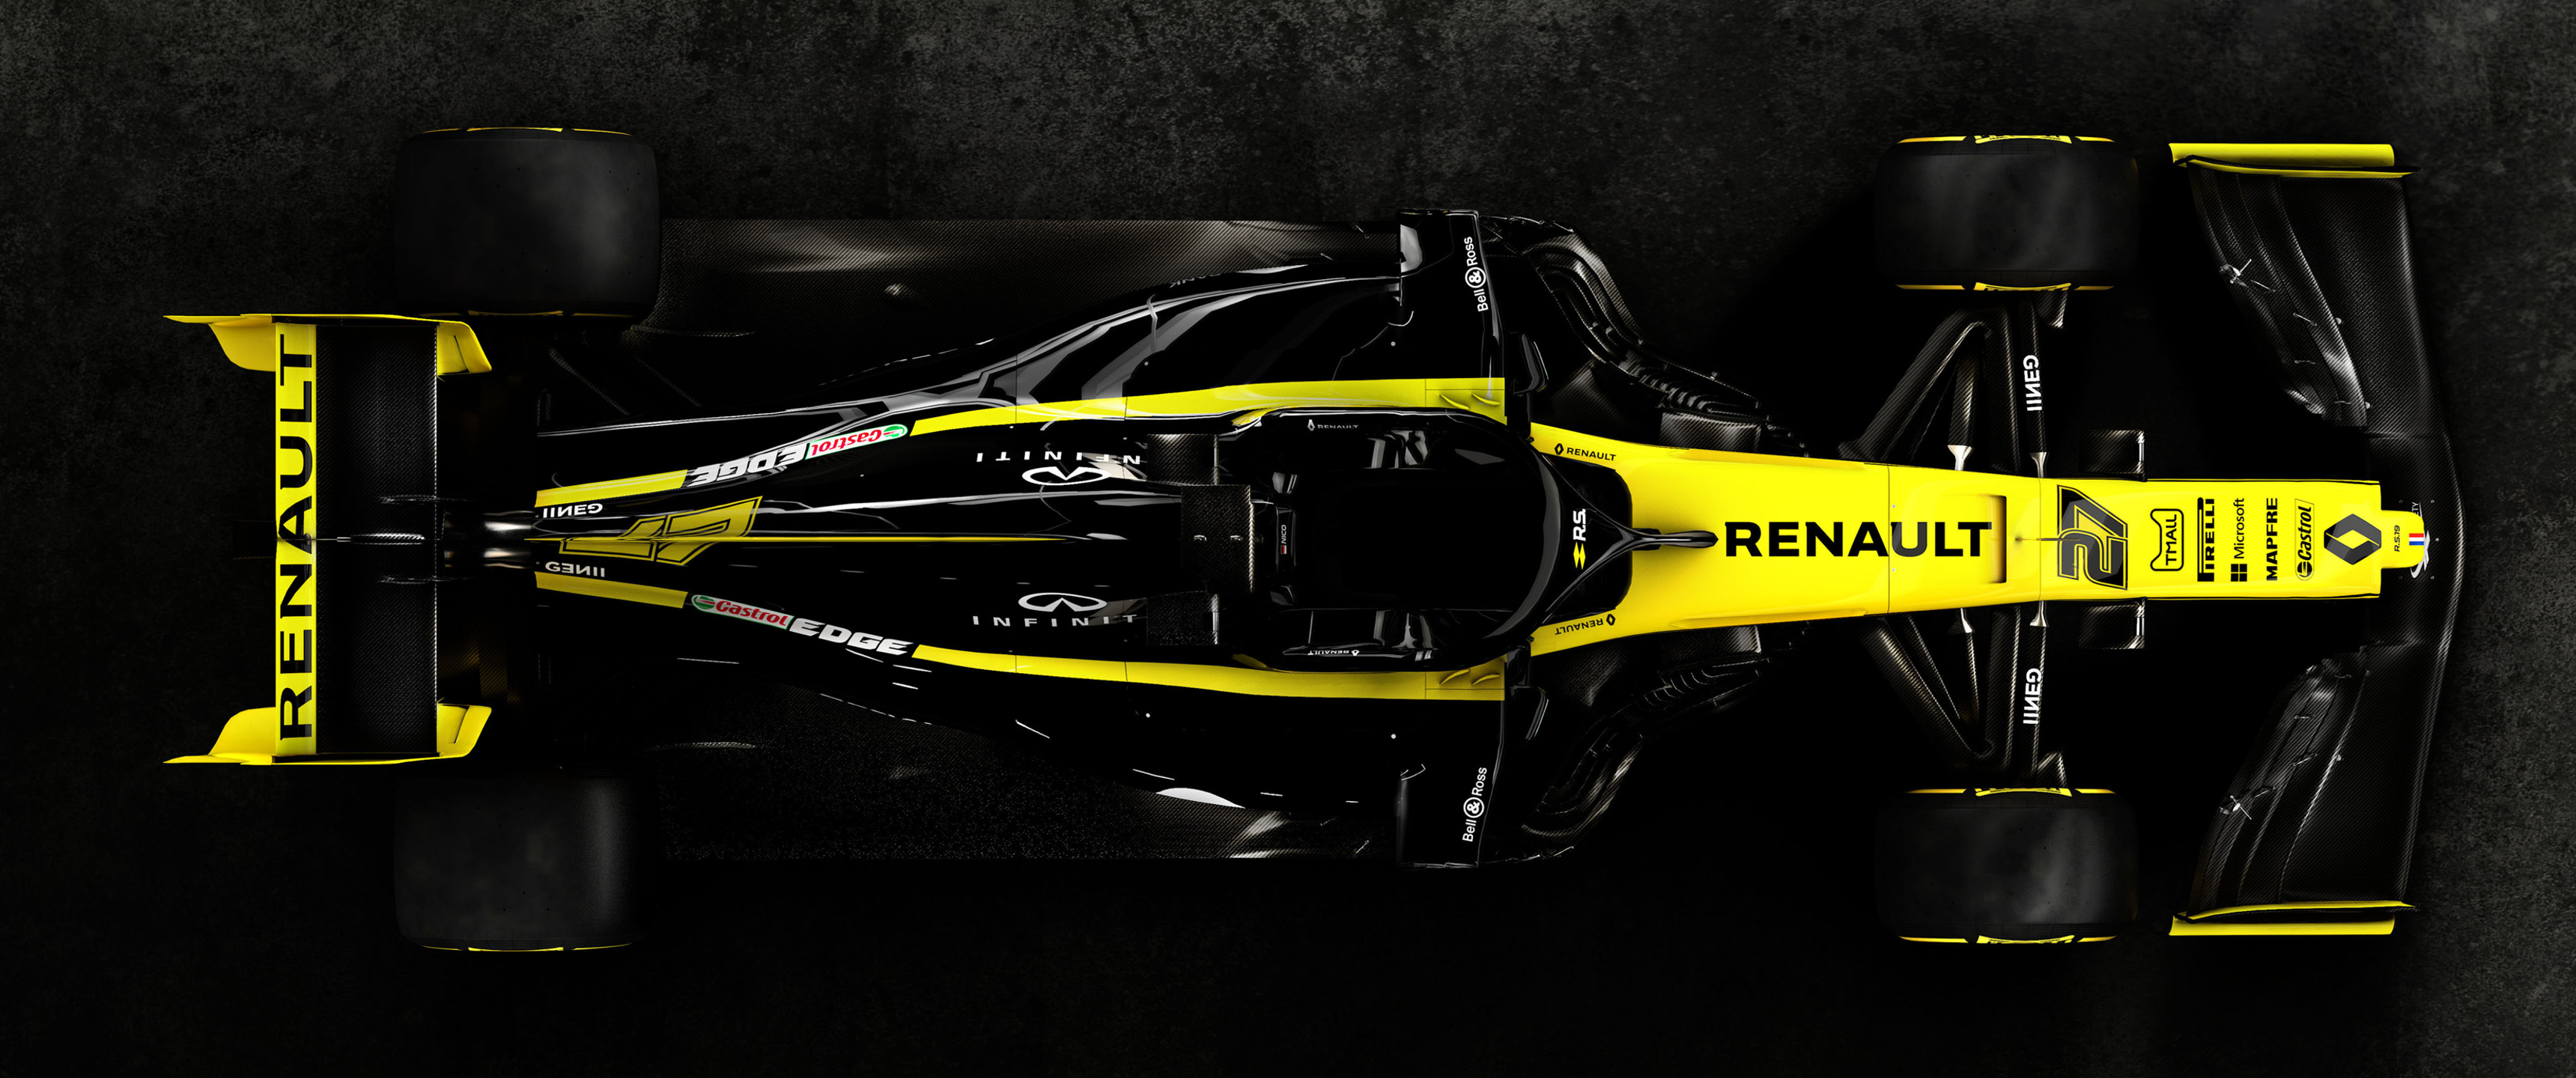 General 3440x1440 Formula 1 Renault F1 Team wide screen race cars livery French Cars